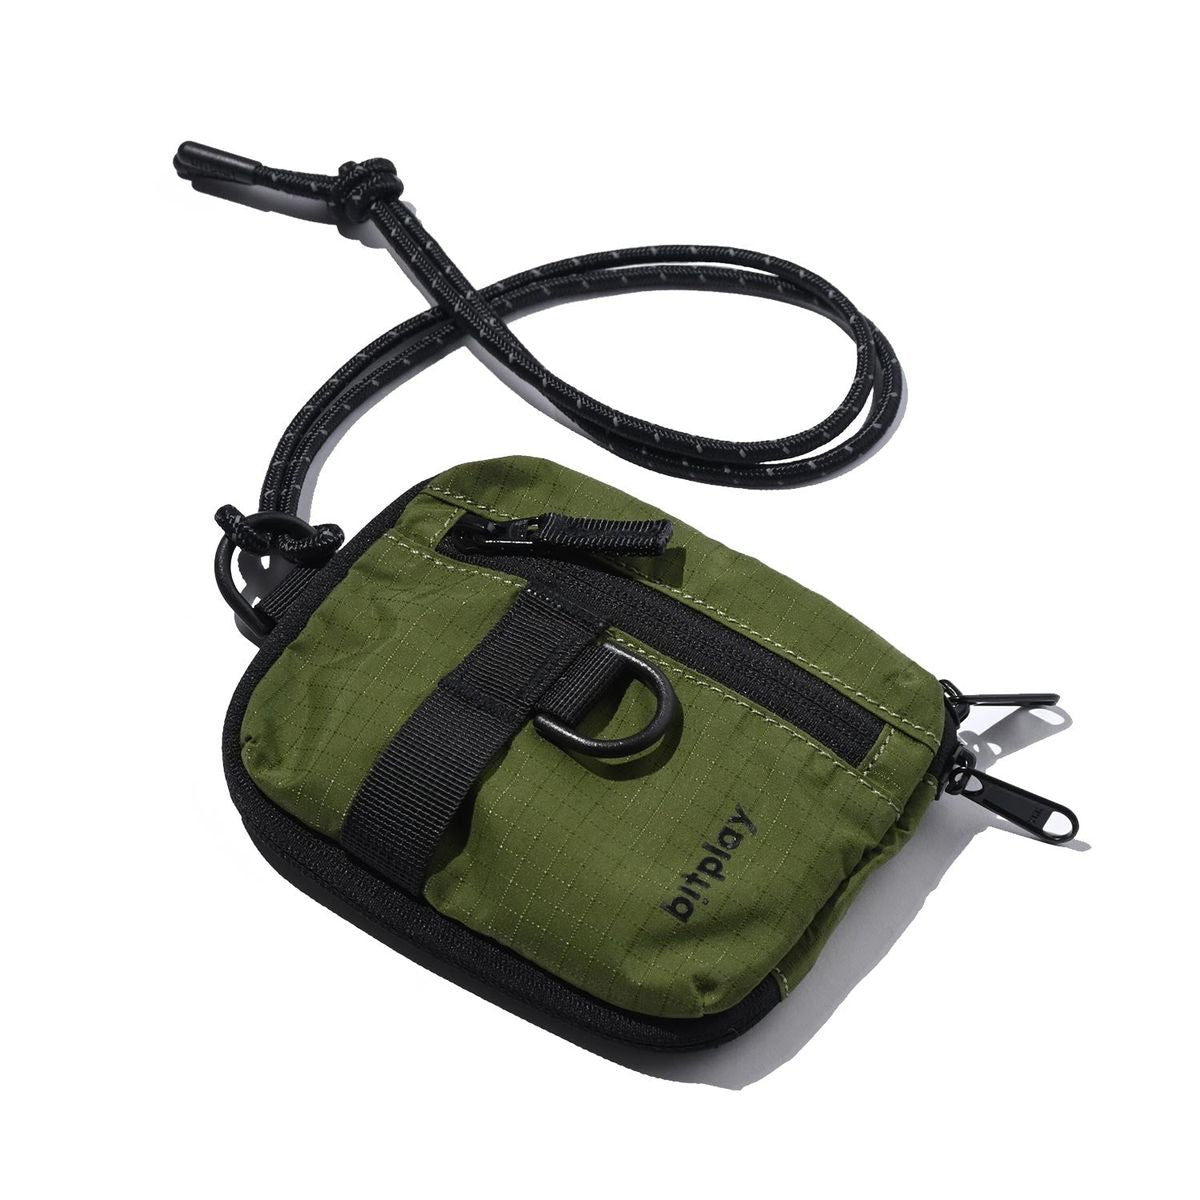 Bitplay Essential Pouch Ripstop - Army Green